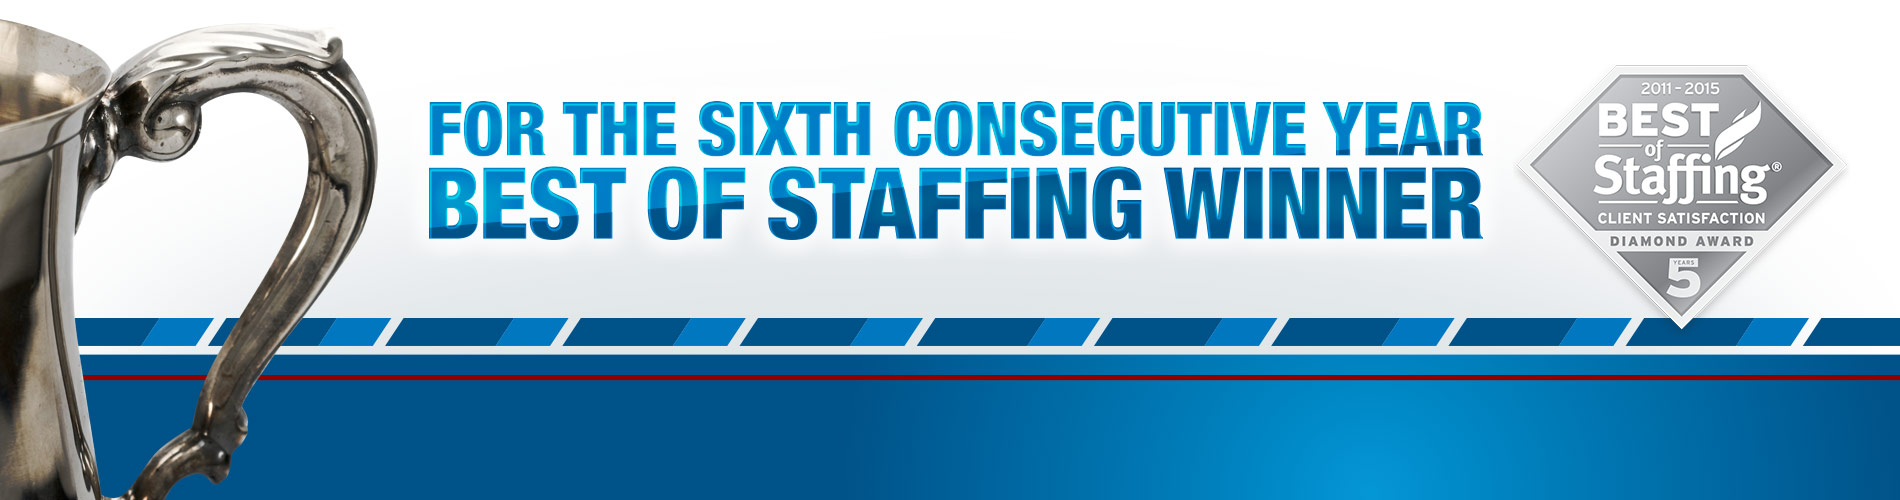 Best of Staffing Home Page Banner Image